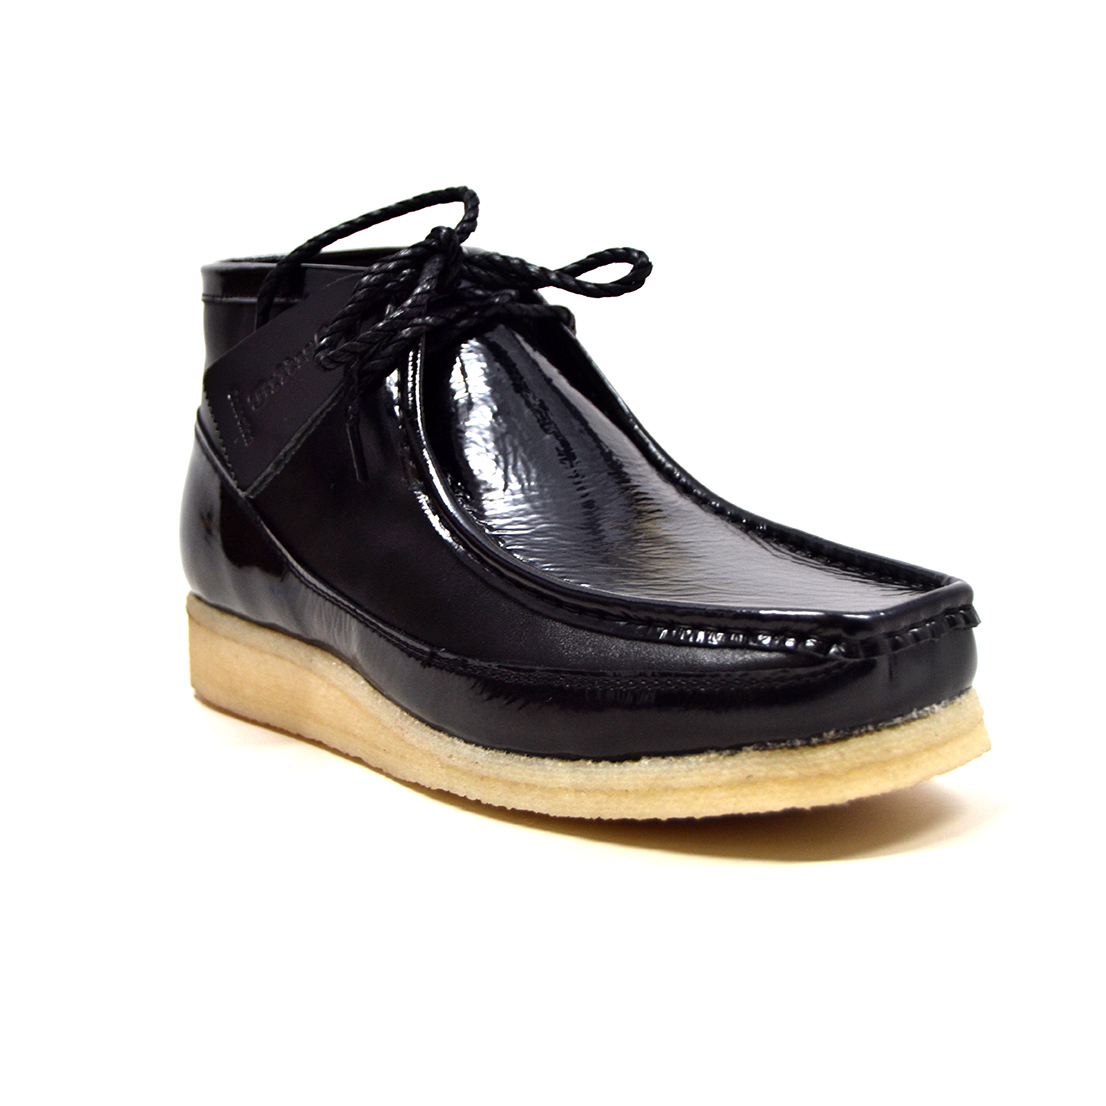 British Collection Walkers-Black Leather and Patent [100100-32] - $170. ...